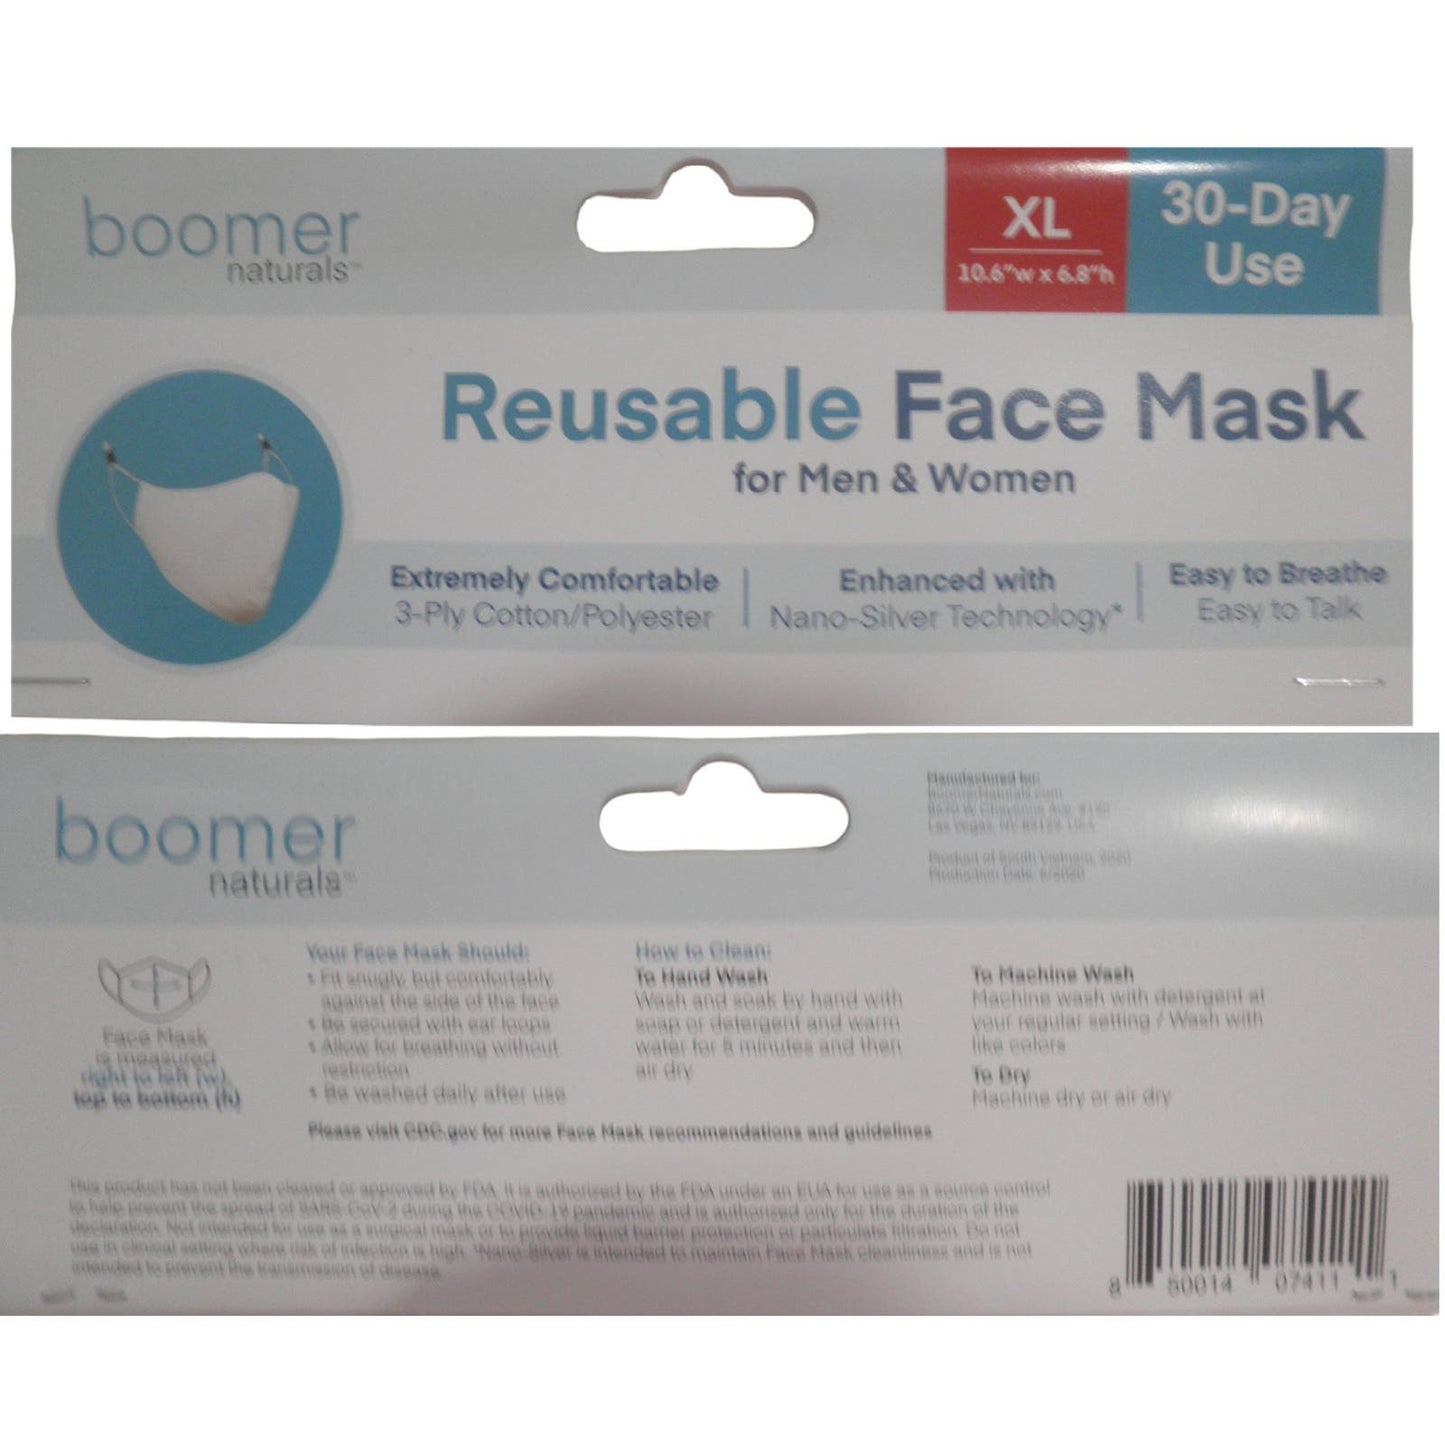 3 XL Boomer Naturals Silver Infused Cloth Face Masks -Navy Blue, Gray, Camo Blue